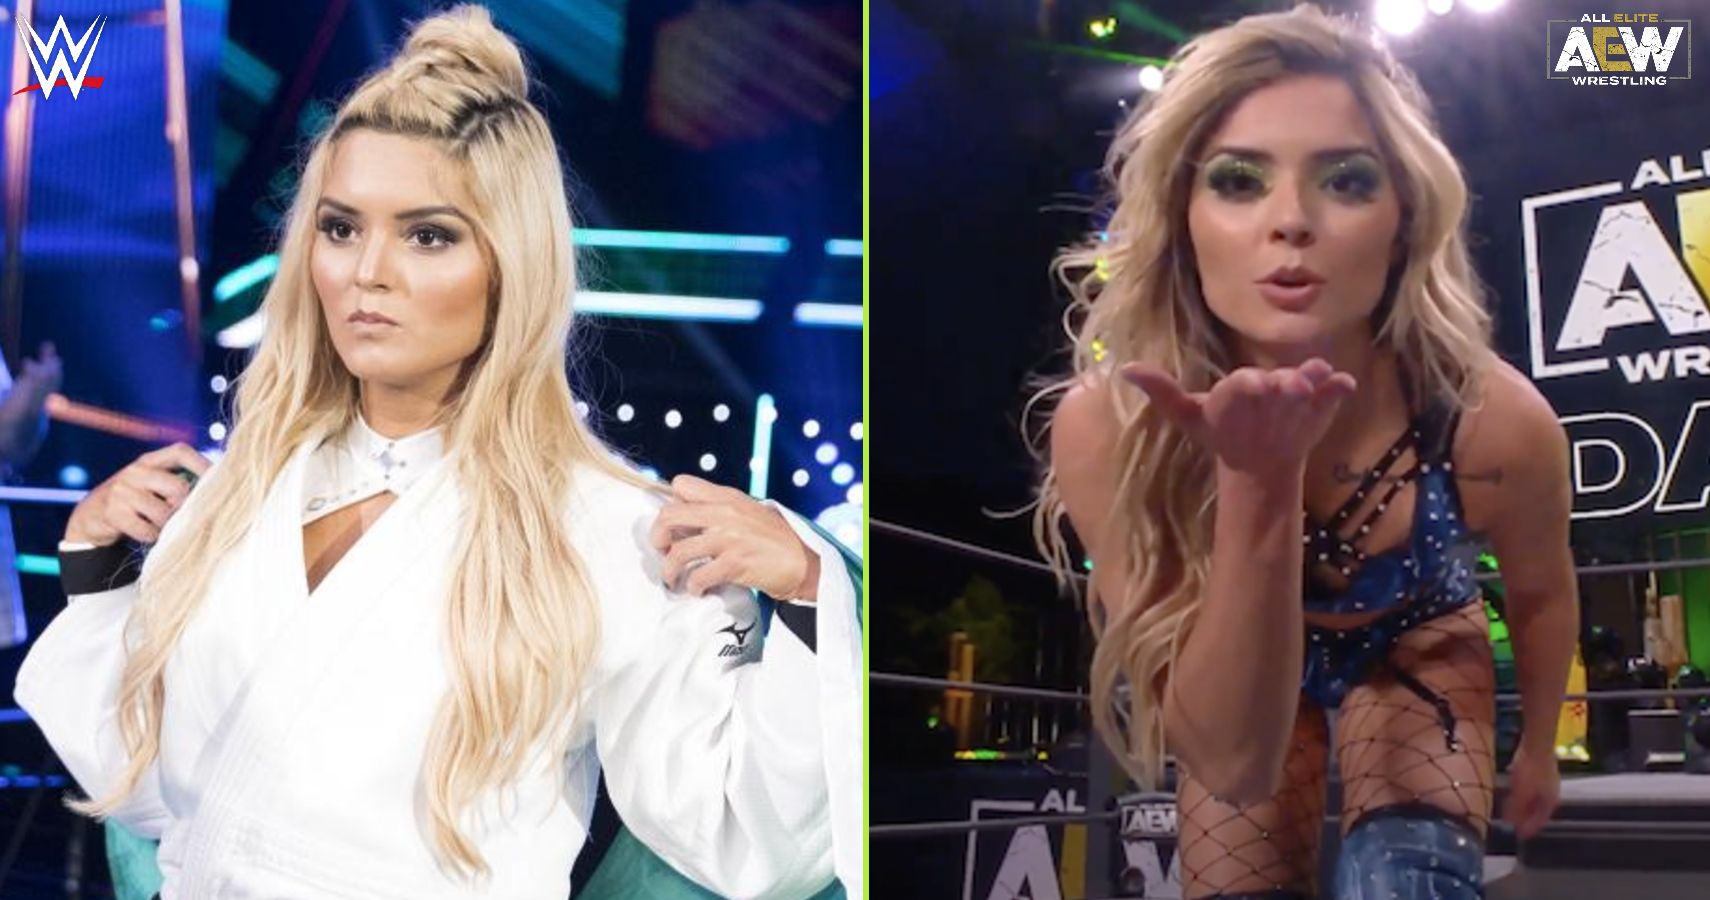 Left: Tay Conti during her entrance at a WWE event Right: Tay Conti on an AEW program